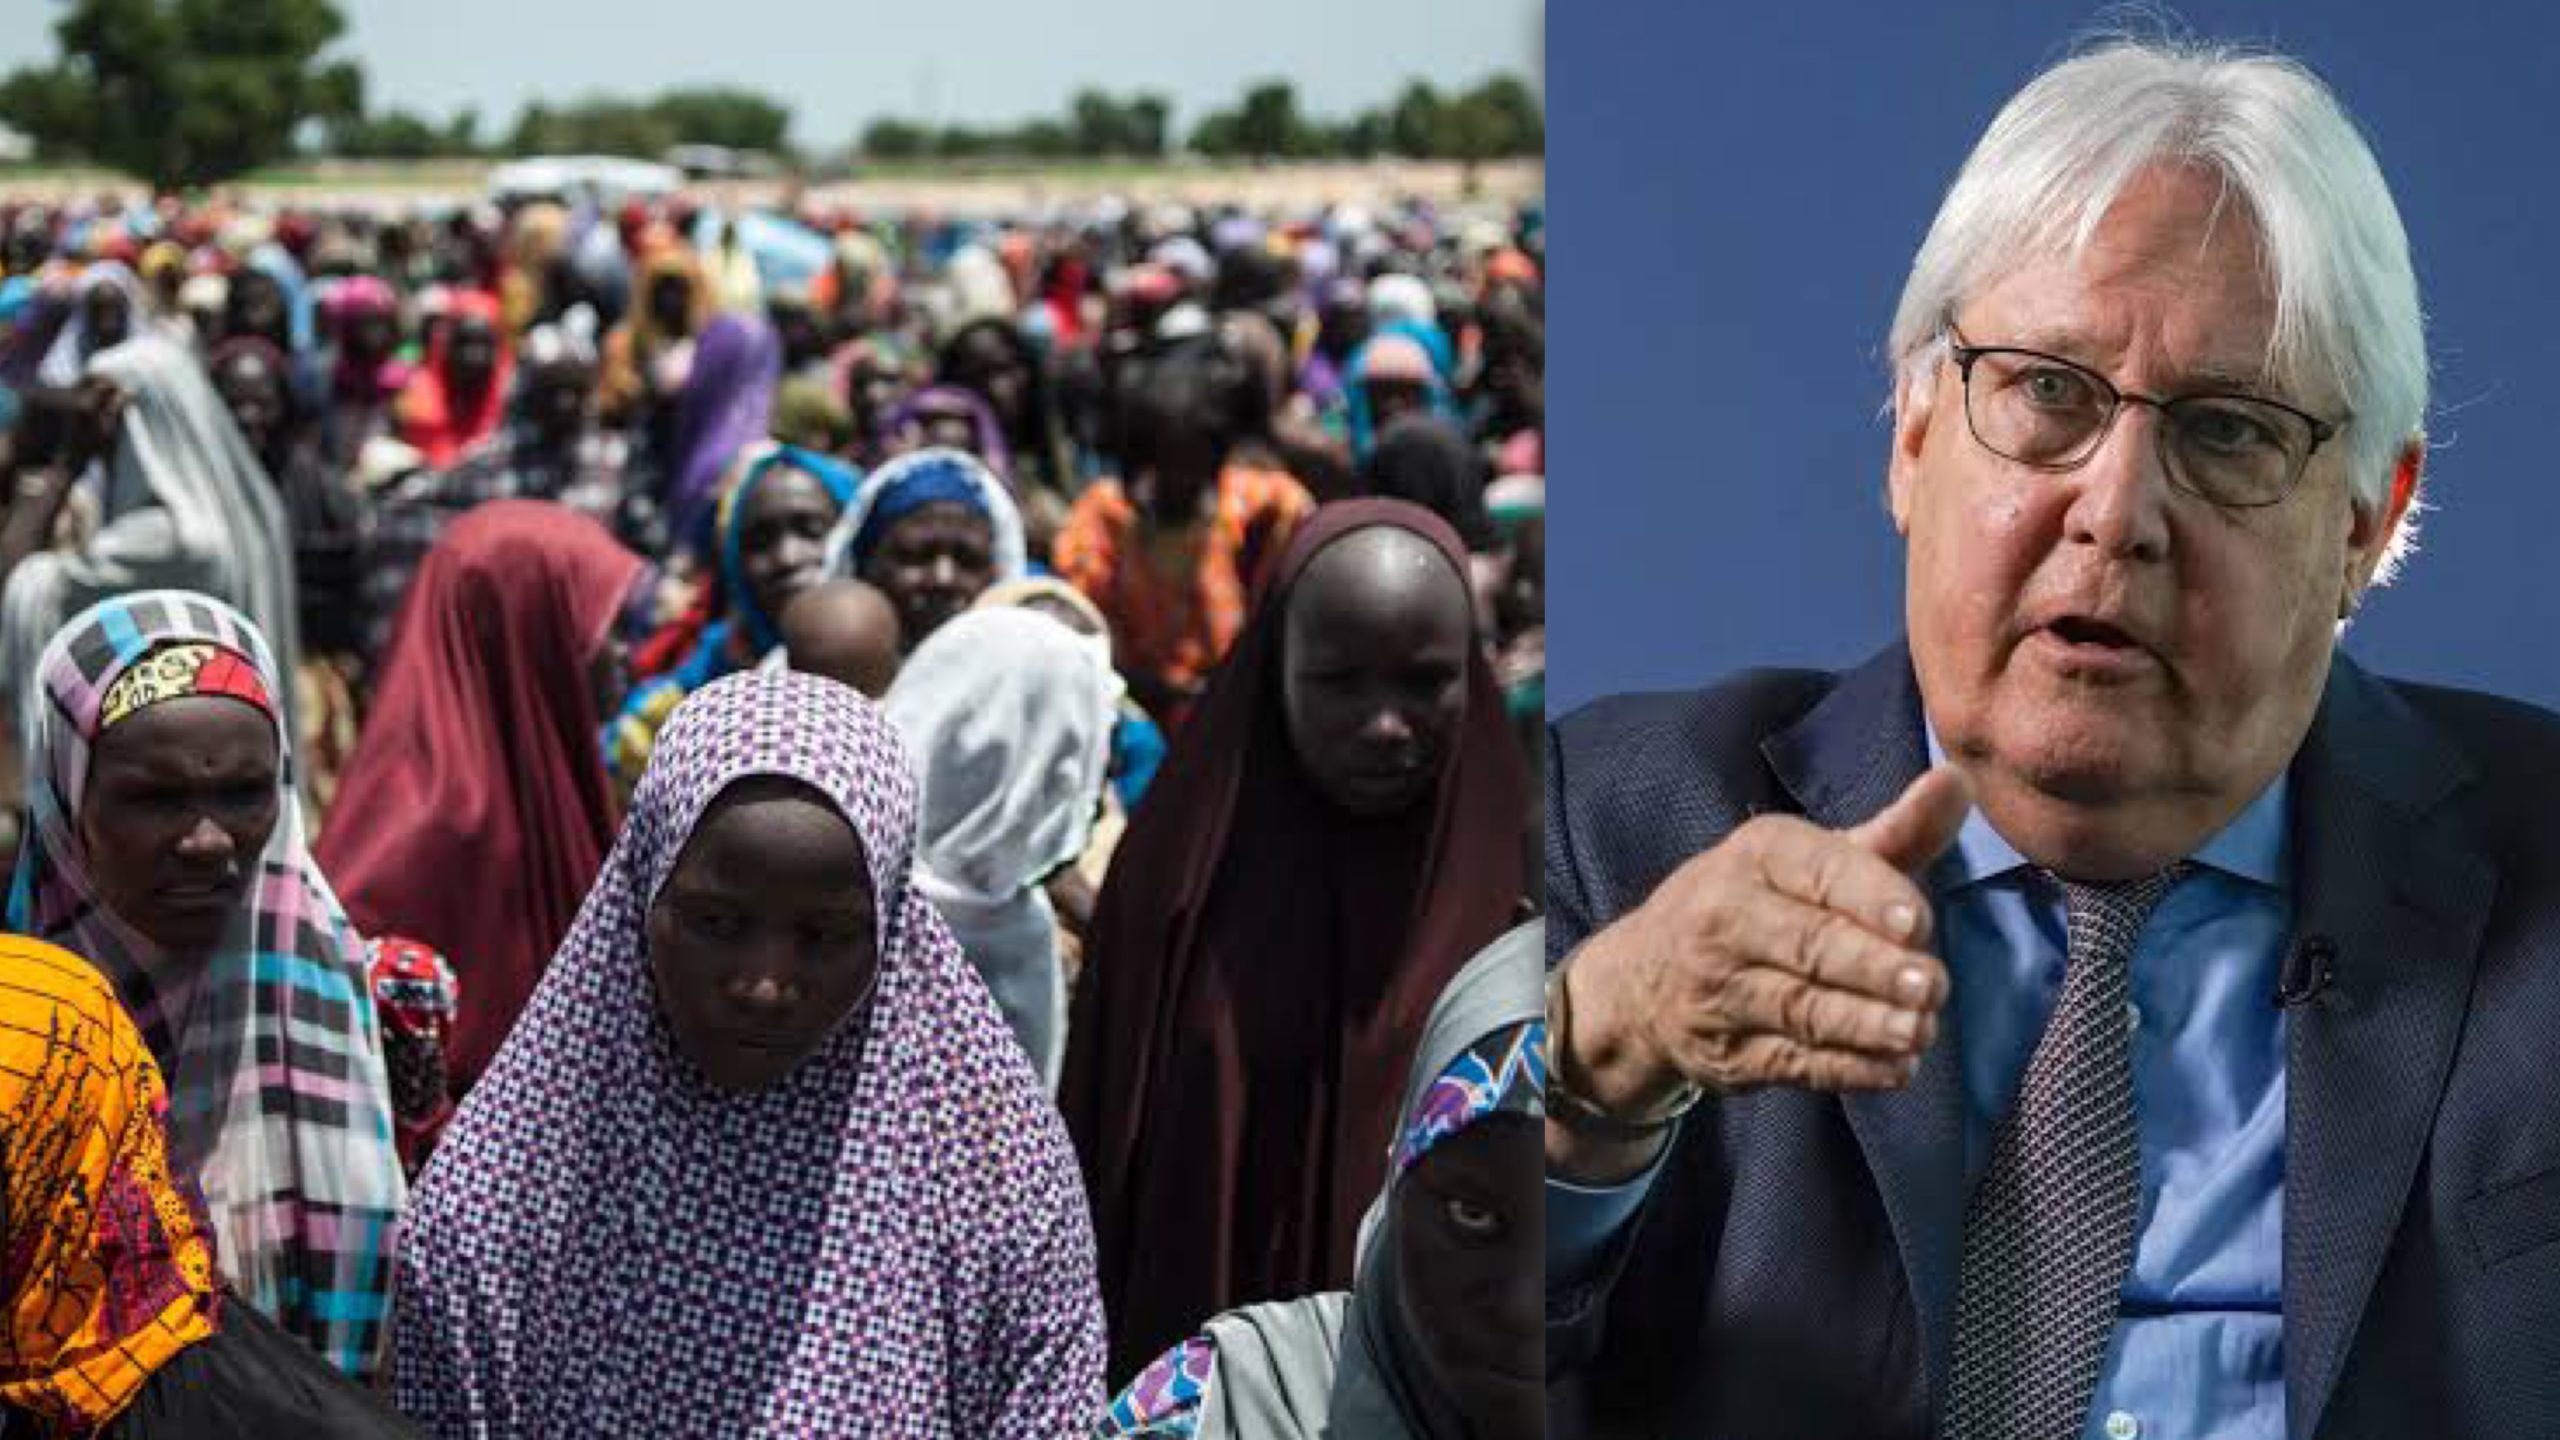 IDPs in Nigeria, Martin Griffiths